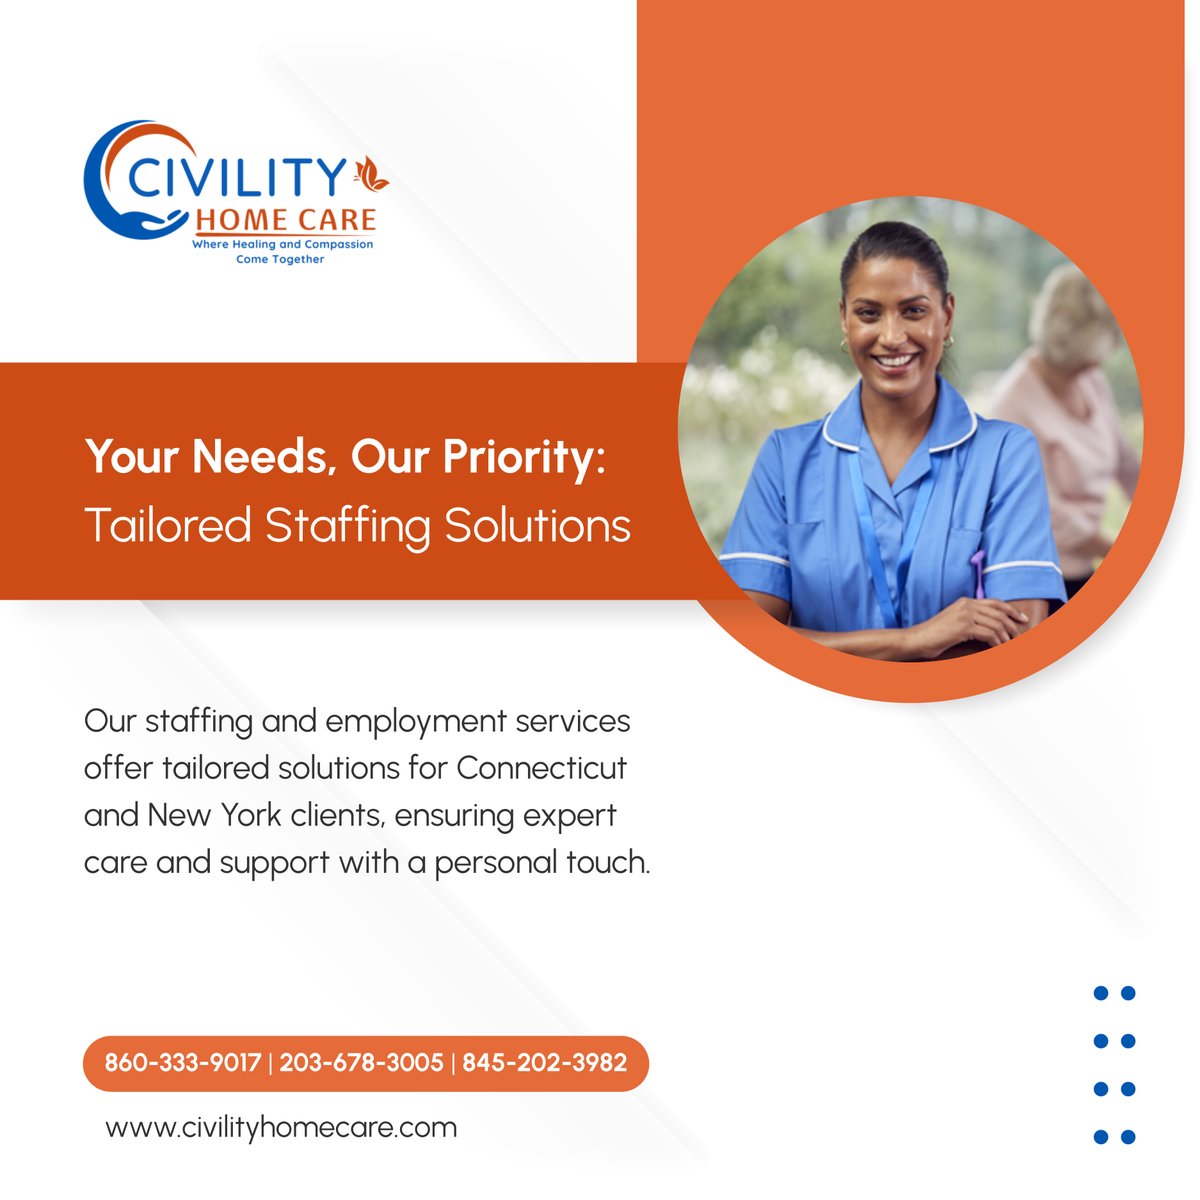 Discover how our staffing solutions can provide expert care and support tailored to your specific needs, empowering you to live life to the fullest. 

#NewingtonCT #HomeCareAndMedicalSupplies #StaffingServices #EmploymentSolutions #ExpertCare